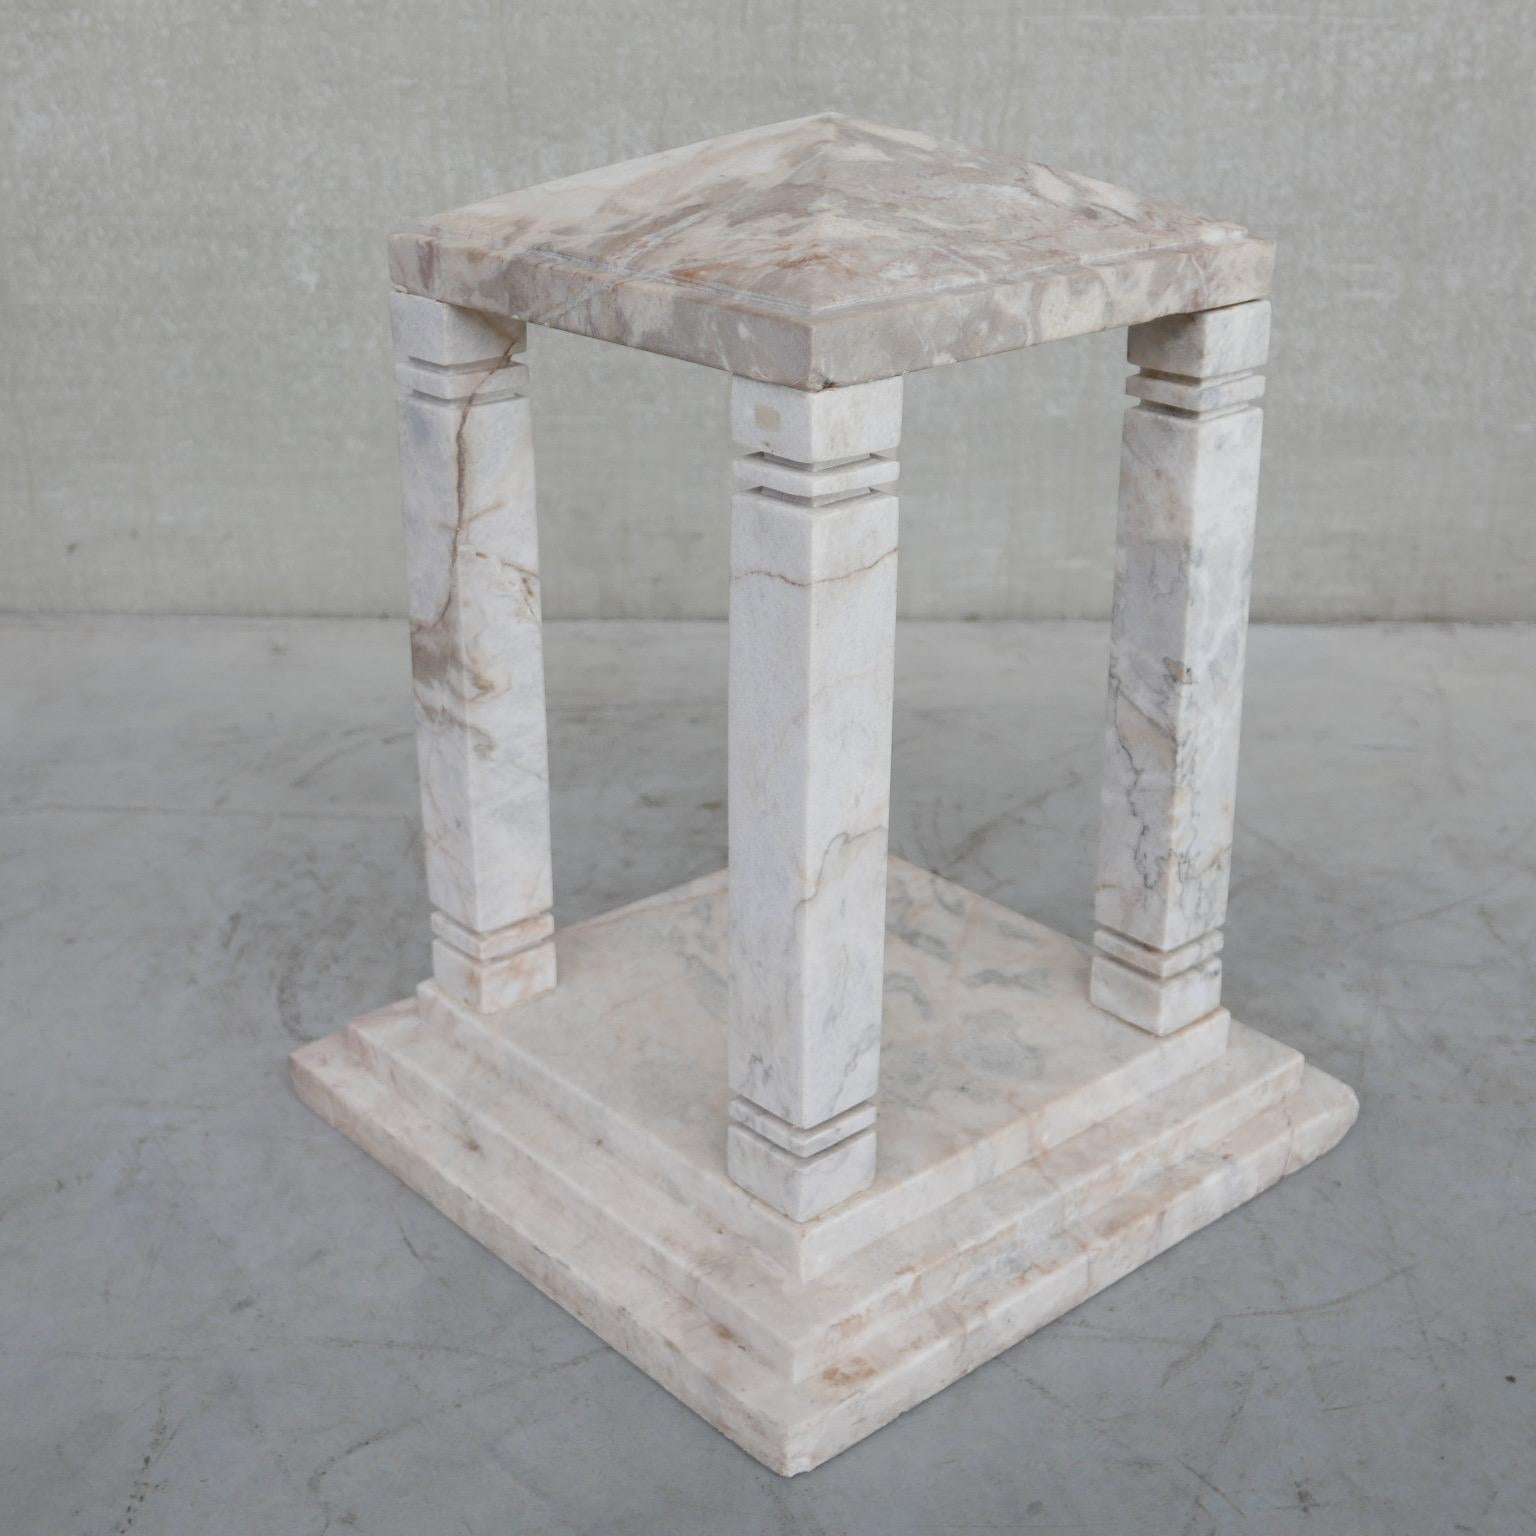 An unusual temple like decorative curio. 

France, early 20th, likely c1920s. 

Formed from sections or marble or alabaster. 

Want's to be put on a console unit as pure decor, or possibly to highlight a piece of art in its open walls. 

The